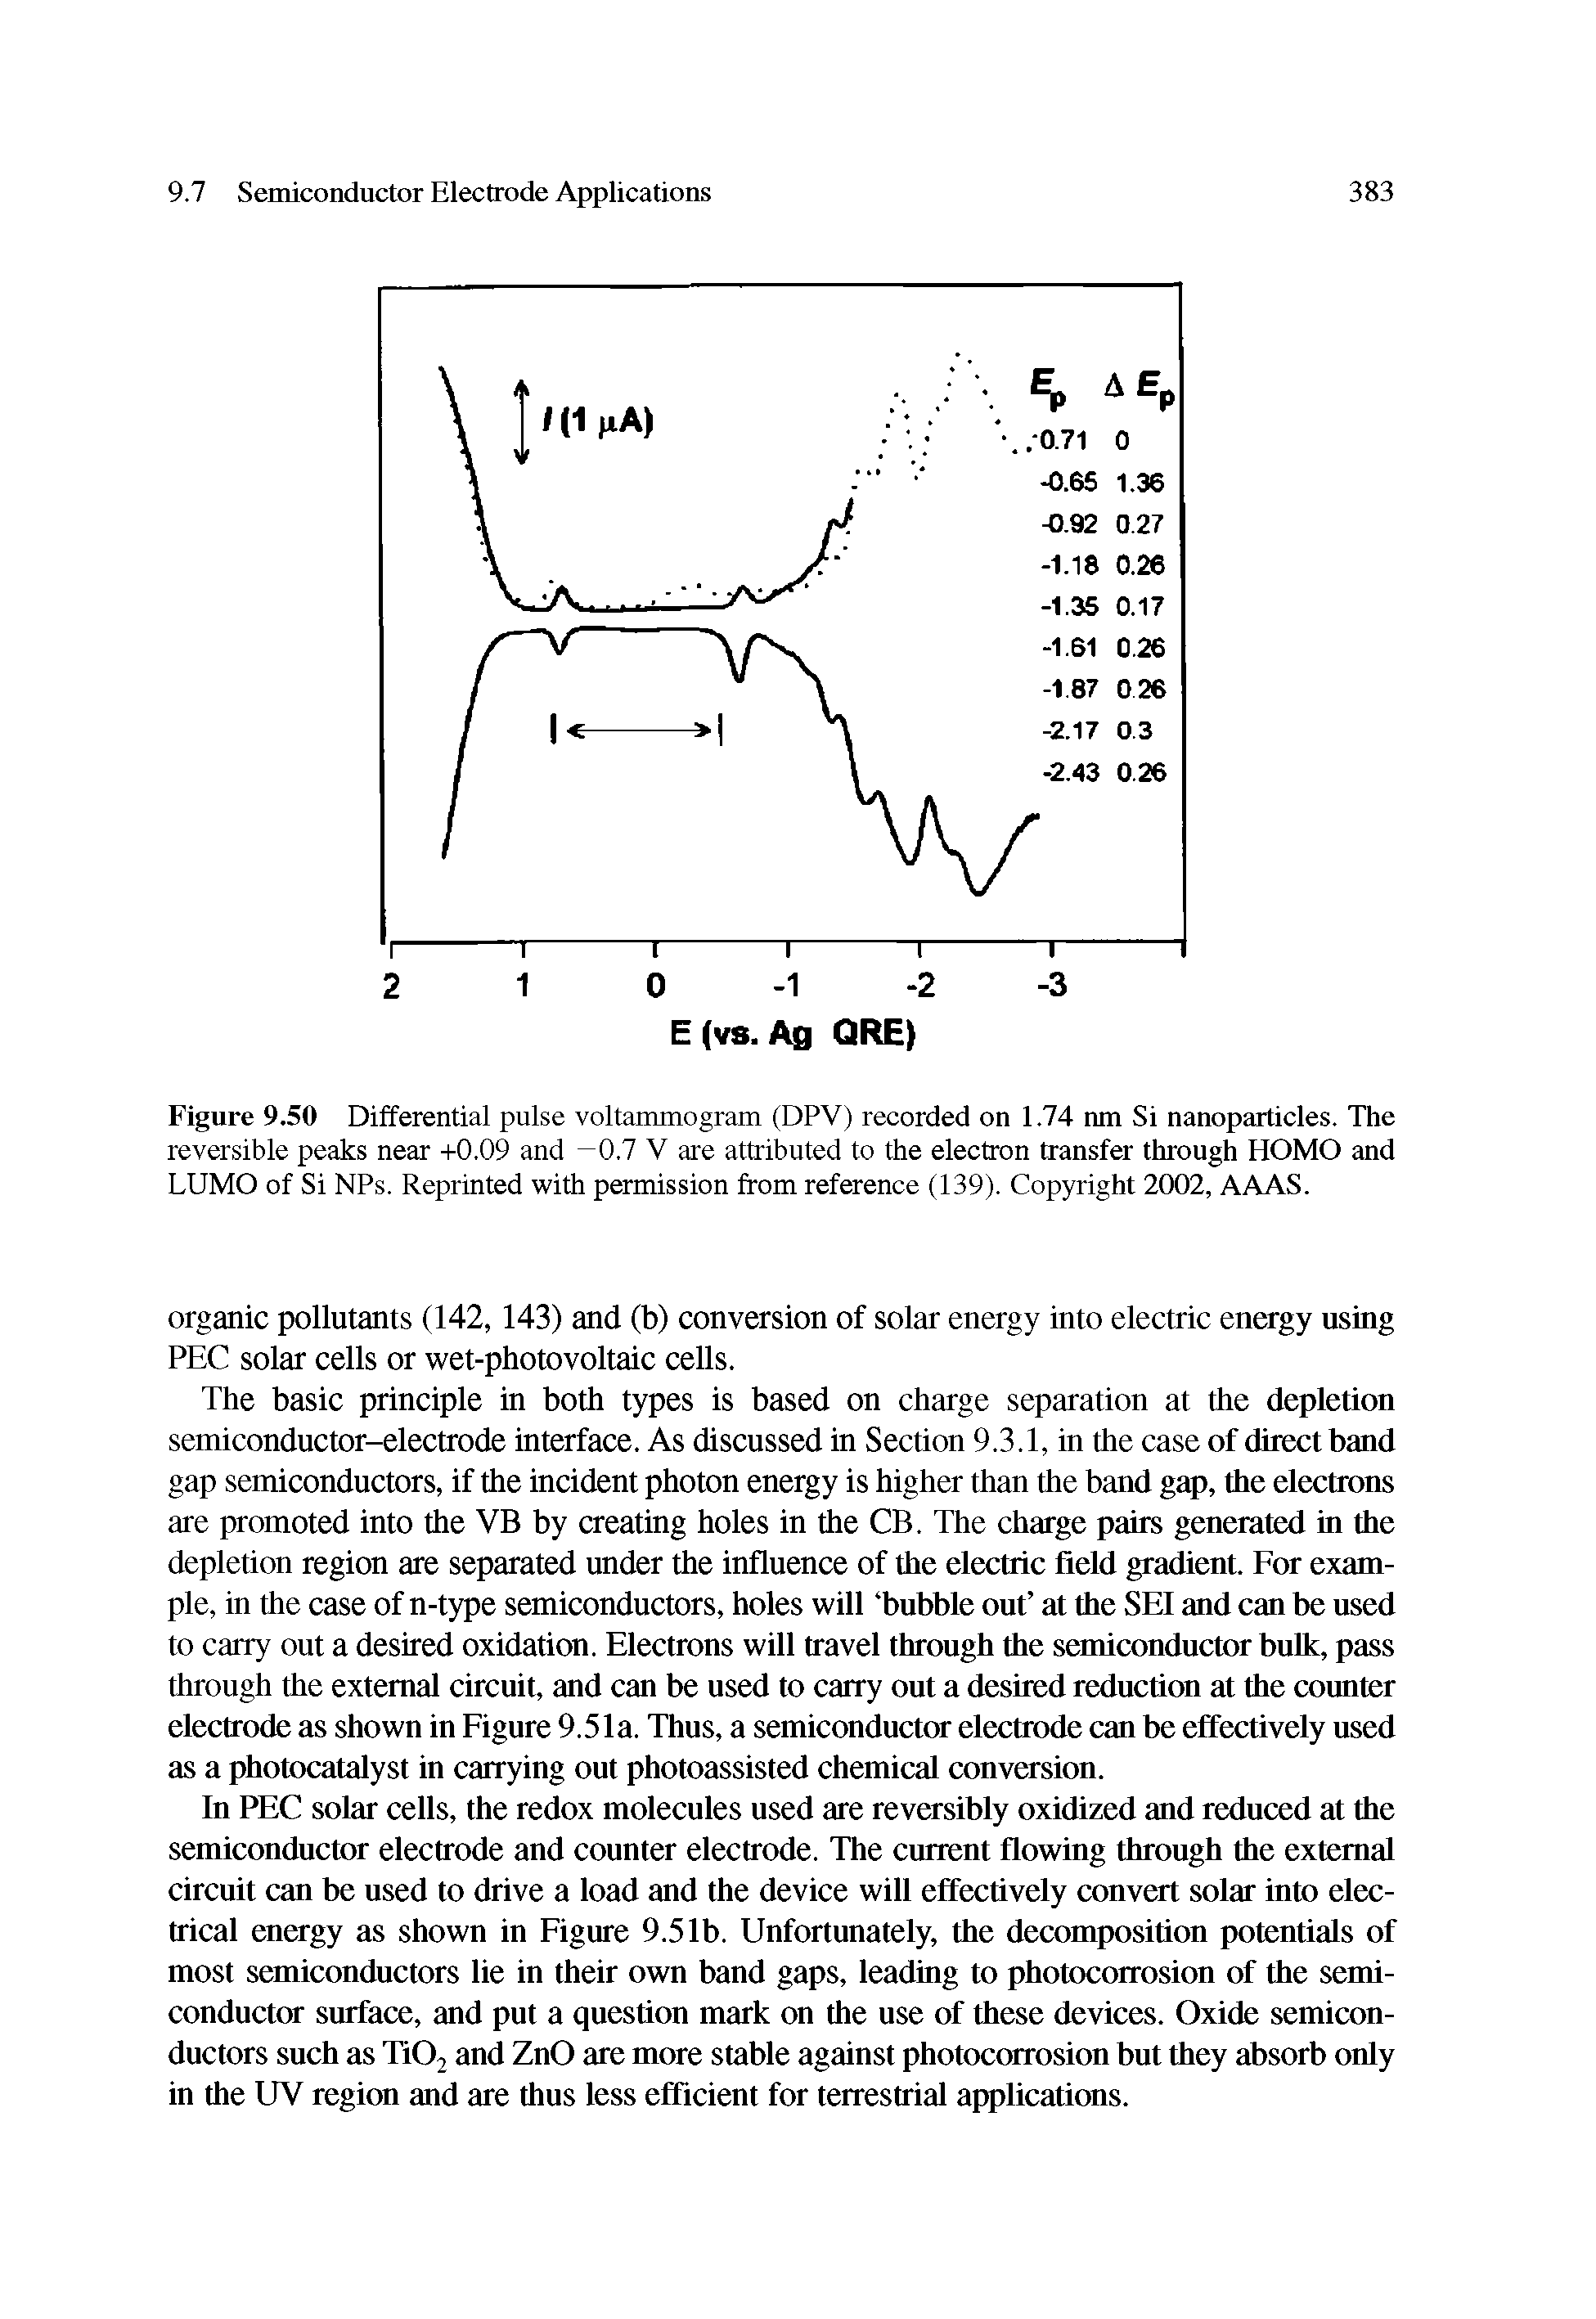 Figure 9.50 Differential pulse voltammogram (DPV) recorded on 1.74 nm Si nanoparticles. The reversible peaks near +0.09 and -0.7 V are attributed to the electron transfer through HOMO and LUMO of Si NPs. Reprinted with permission from reference (139). Copyright 2002, AAAS.